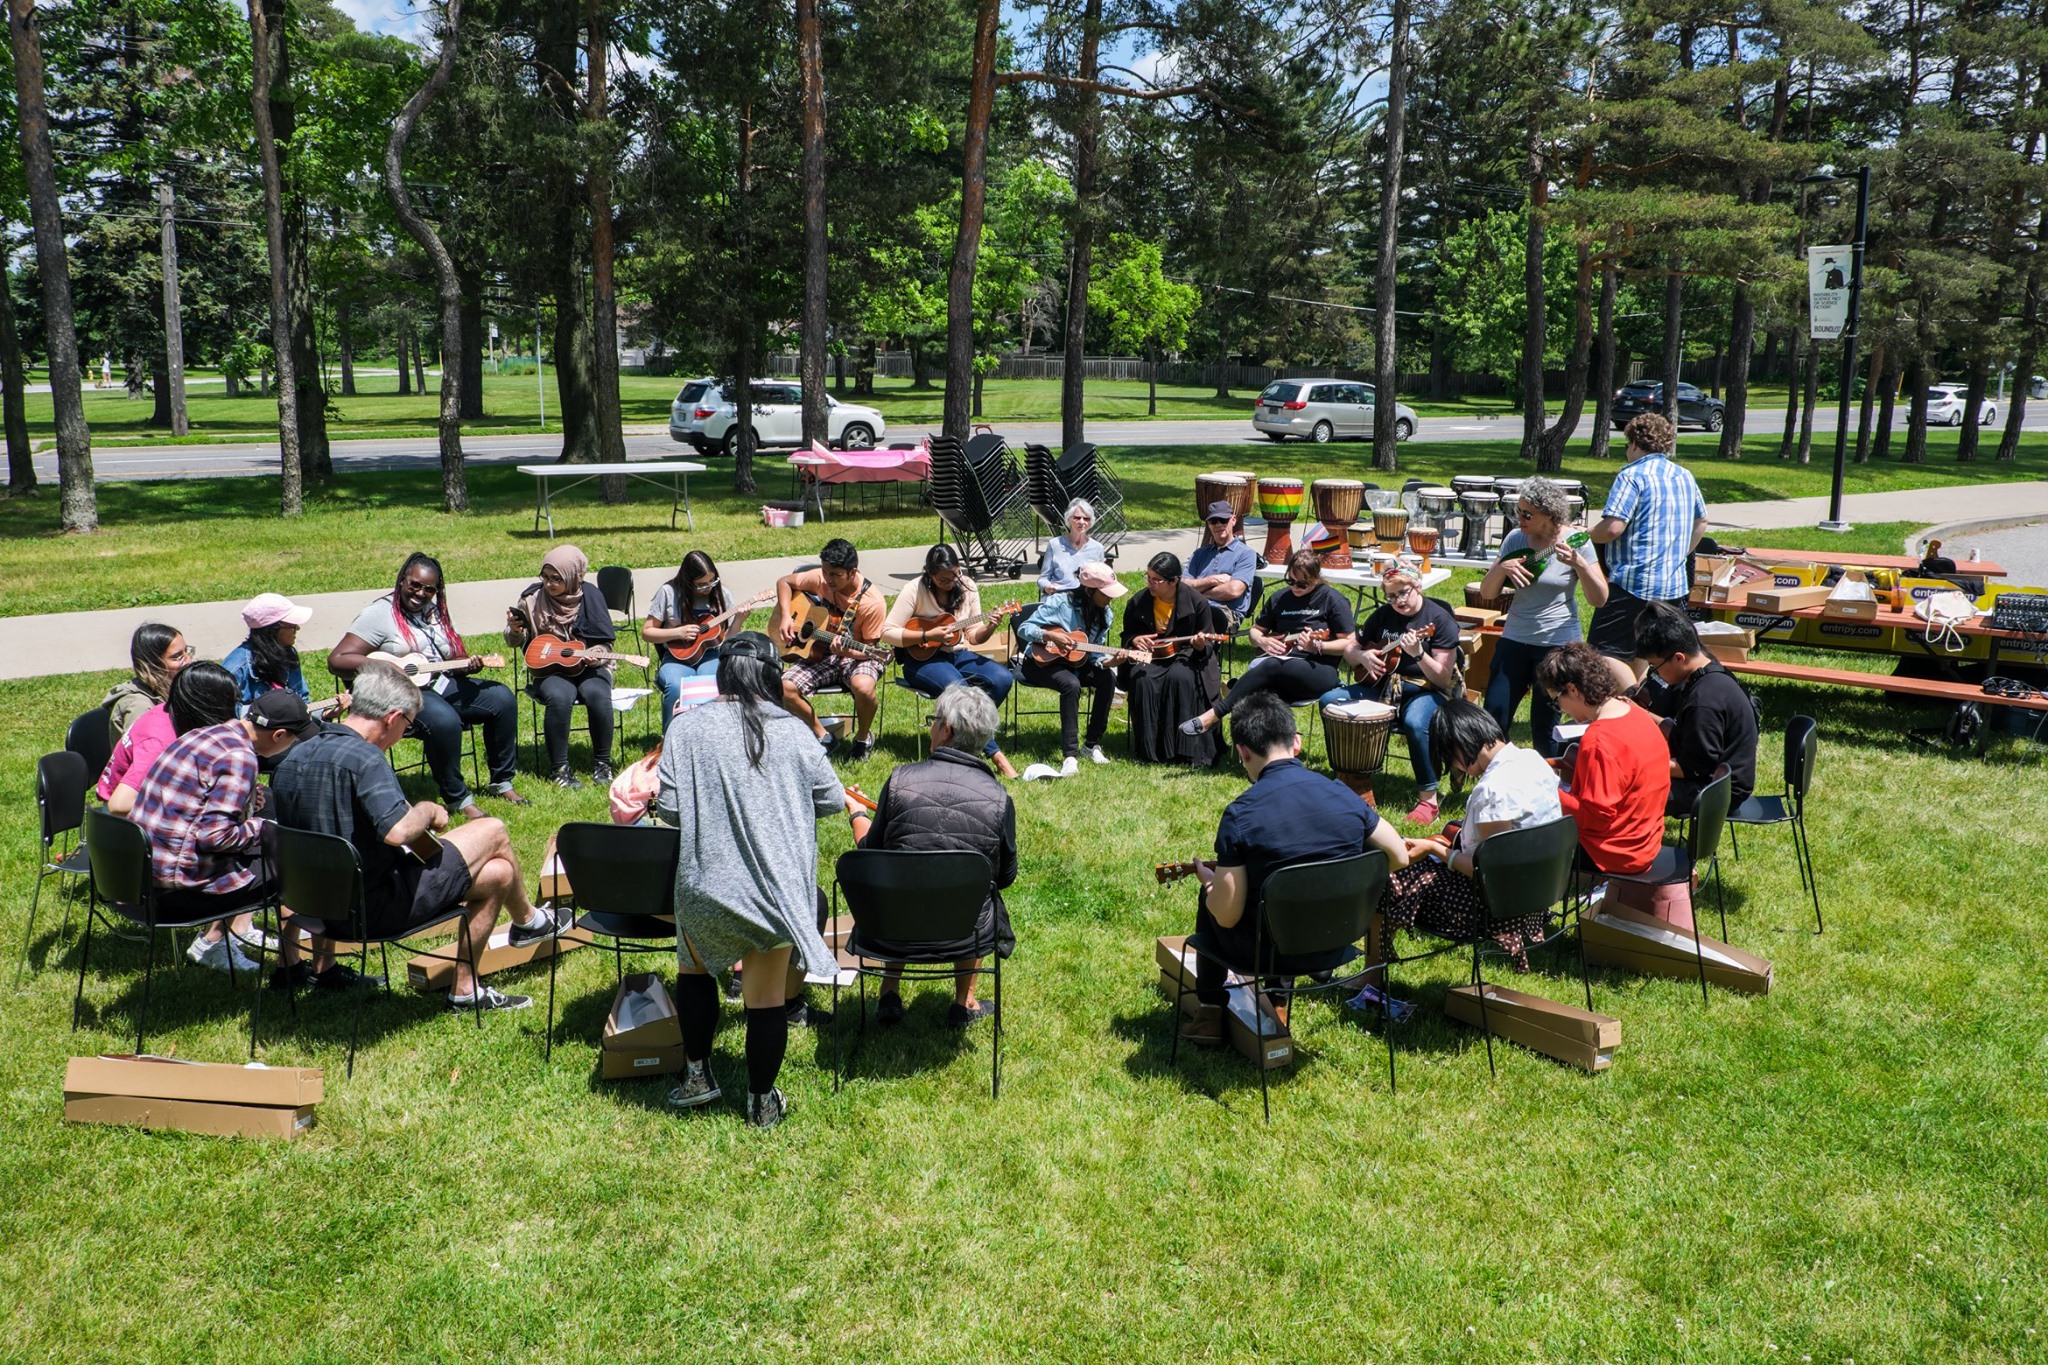 Participants sitting in a large circle on a field playing guitars and ukuleles